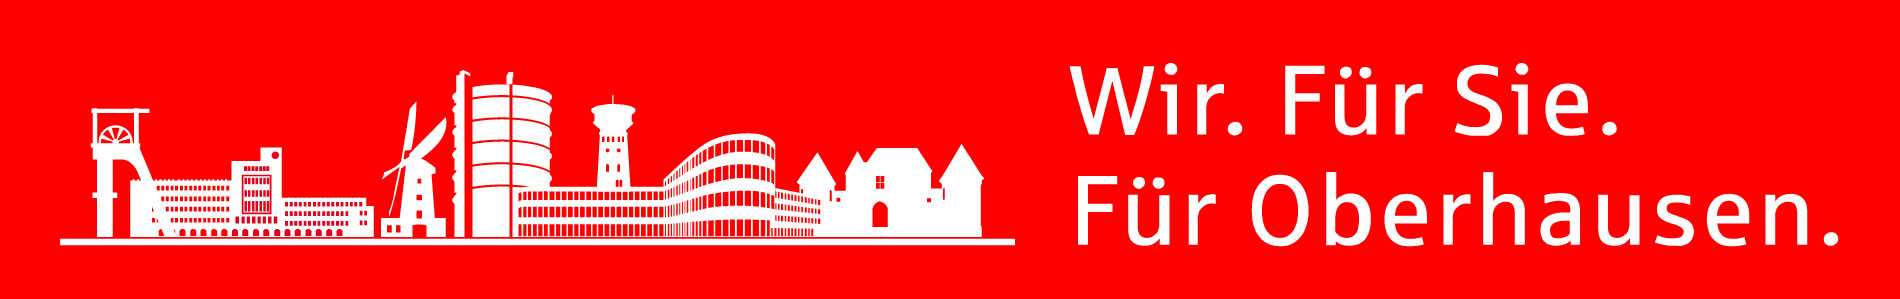 Sparkasse-WFSFO-A_white-red-2